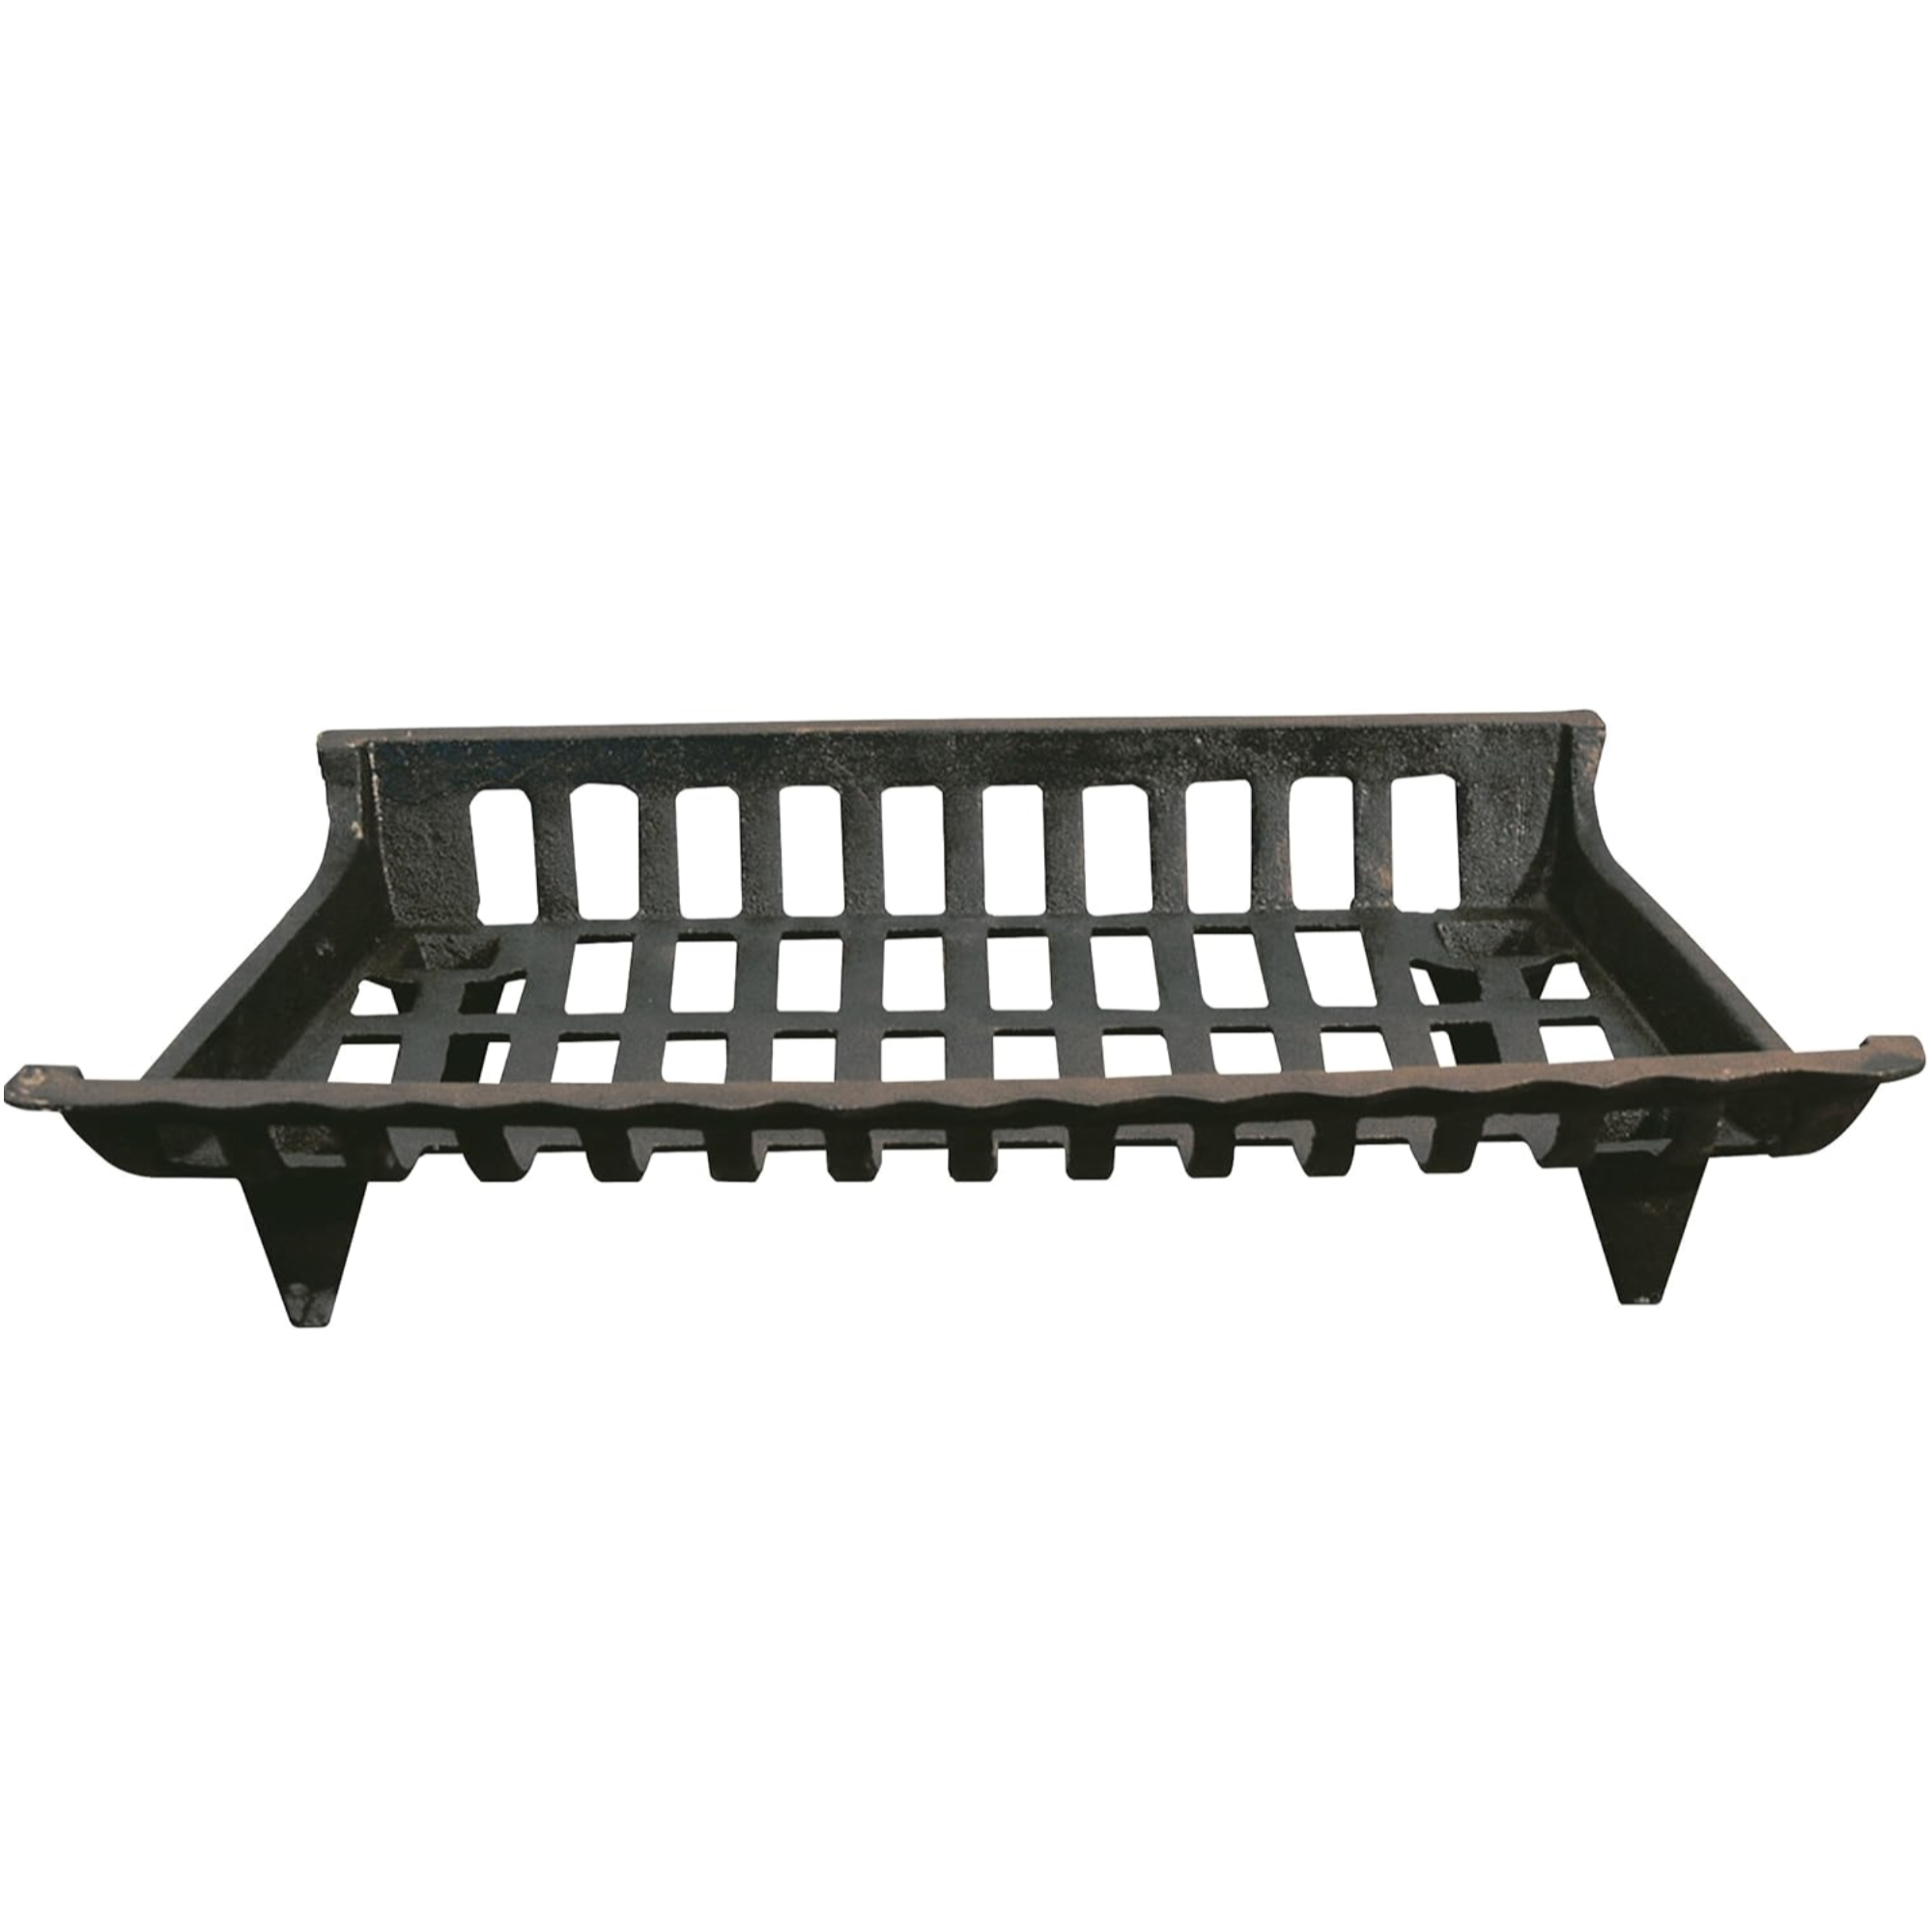 Panacea Cast Iron Grate for Indoor Outdoor Fire Pits and Fireplaces, Black, 30"